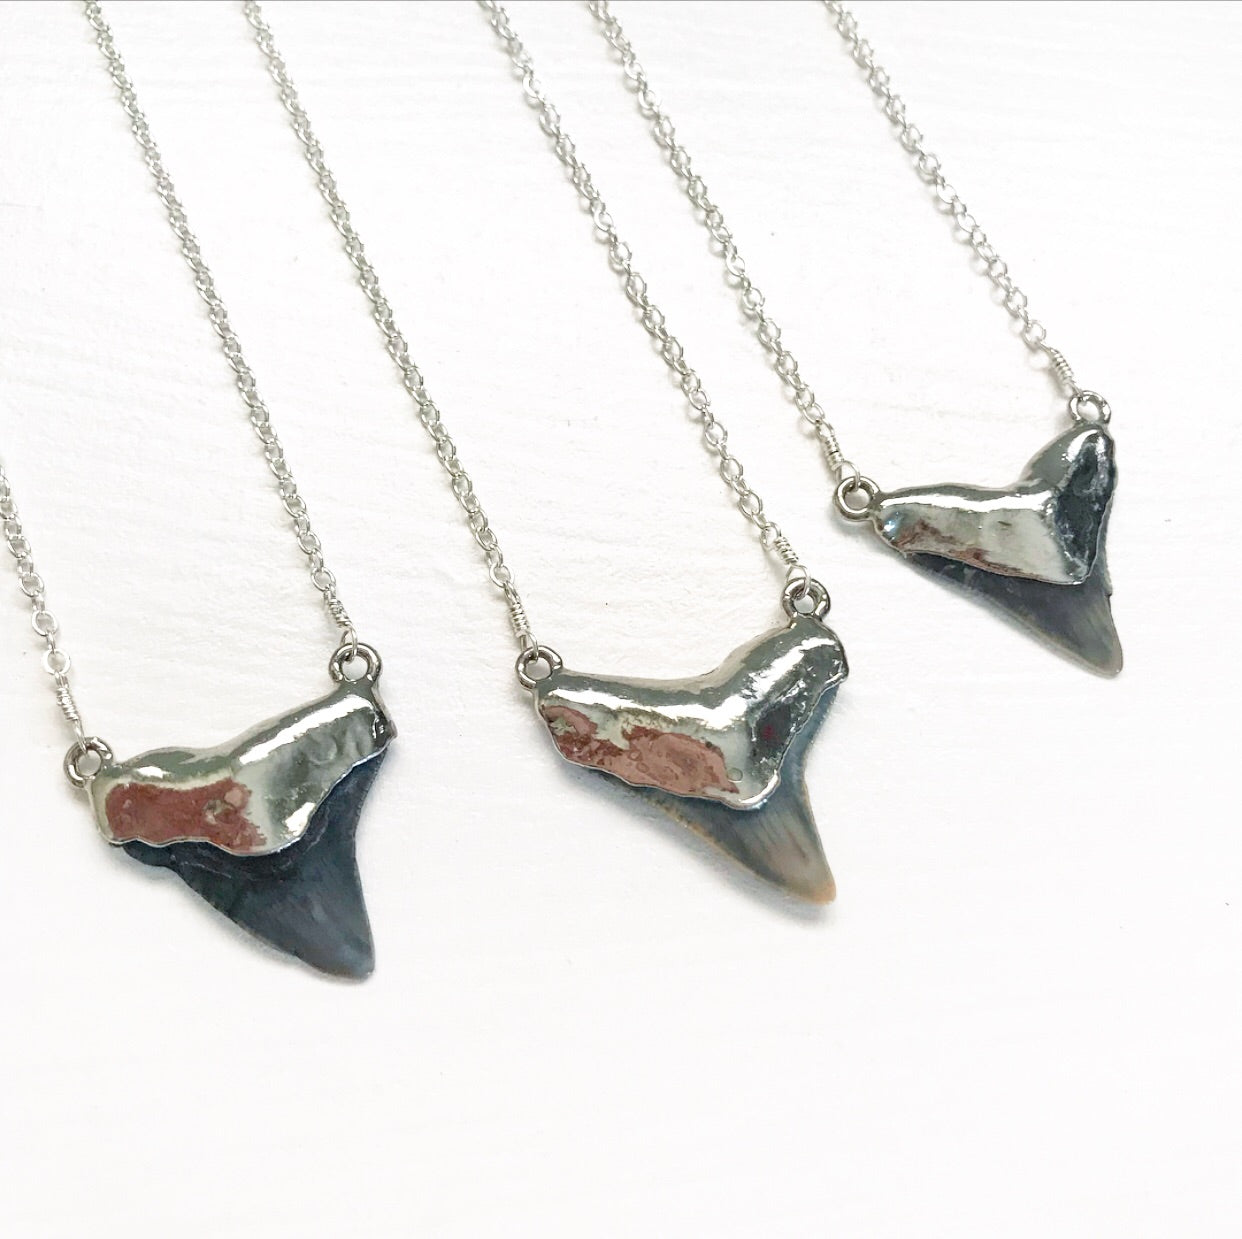 552-Shark Tooth Necklace